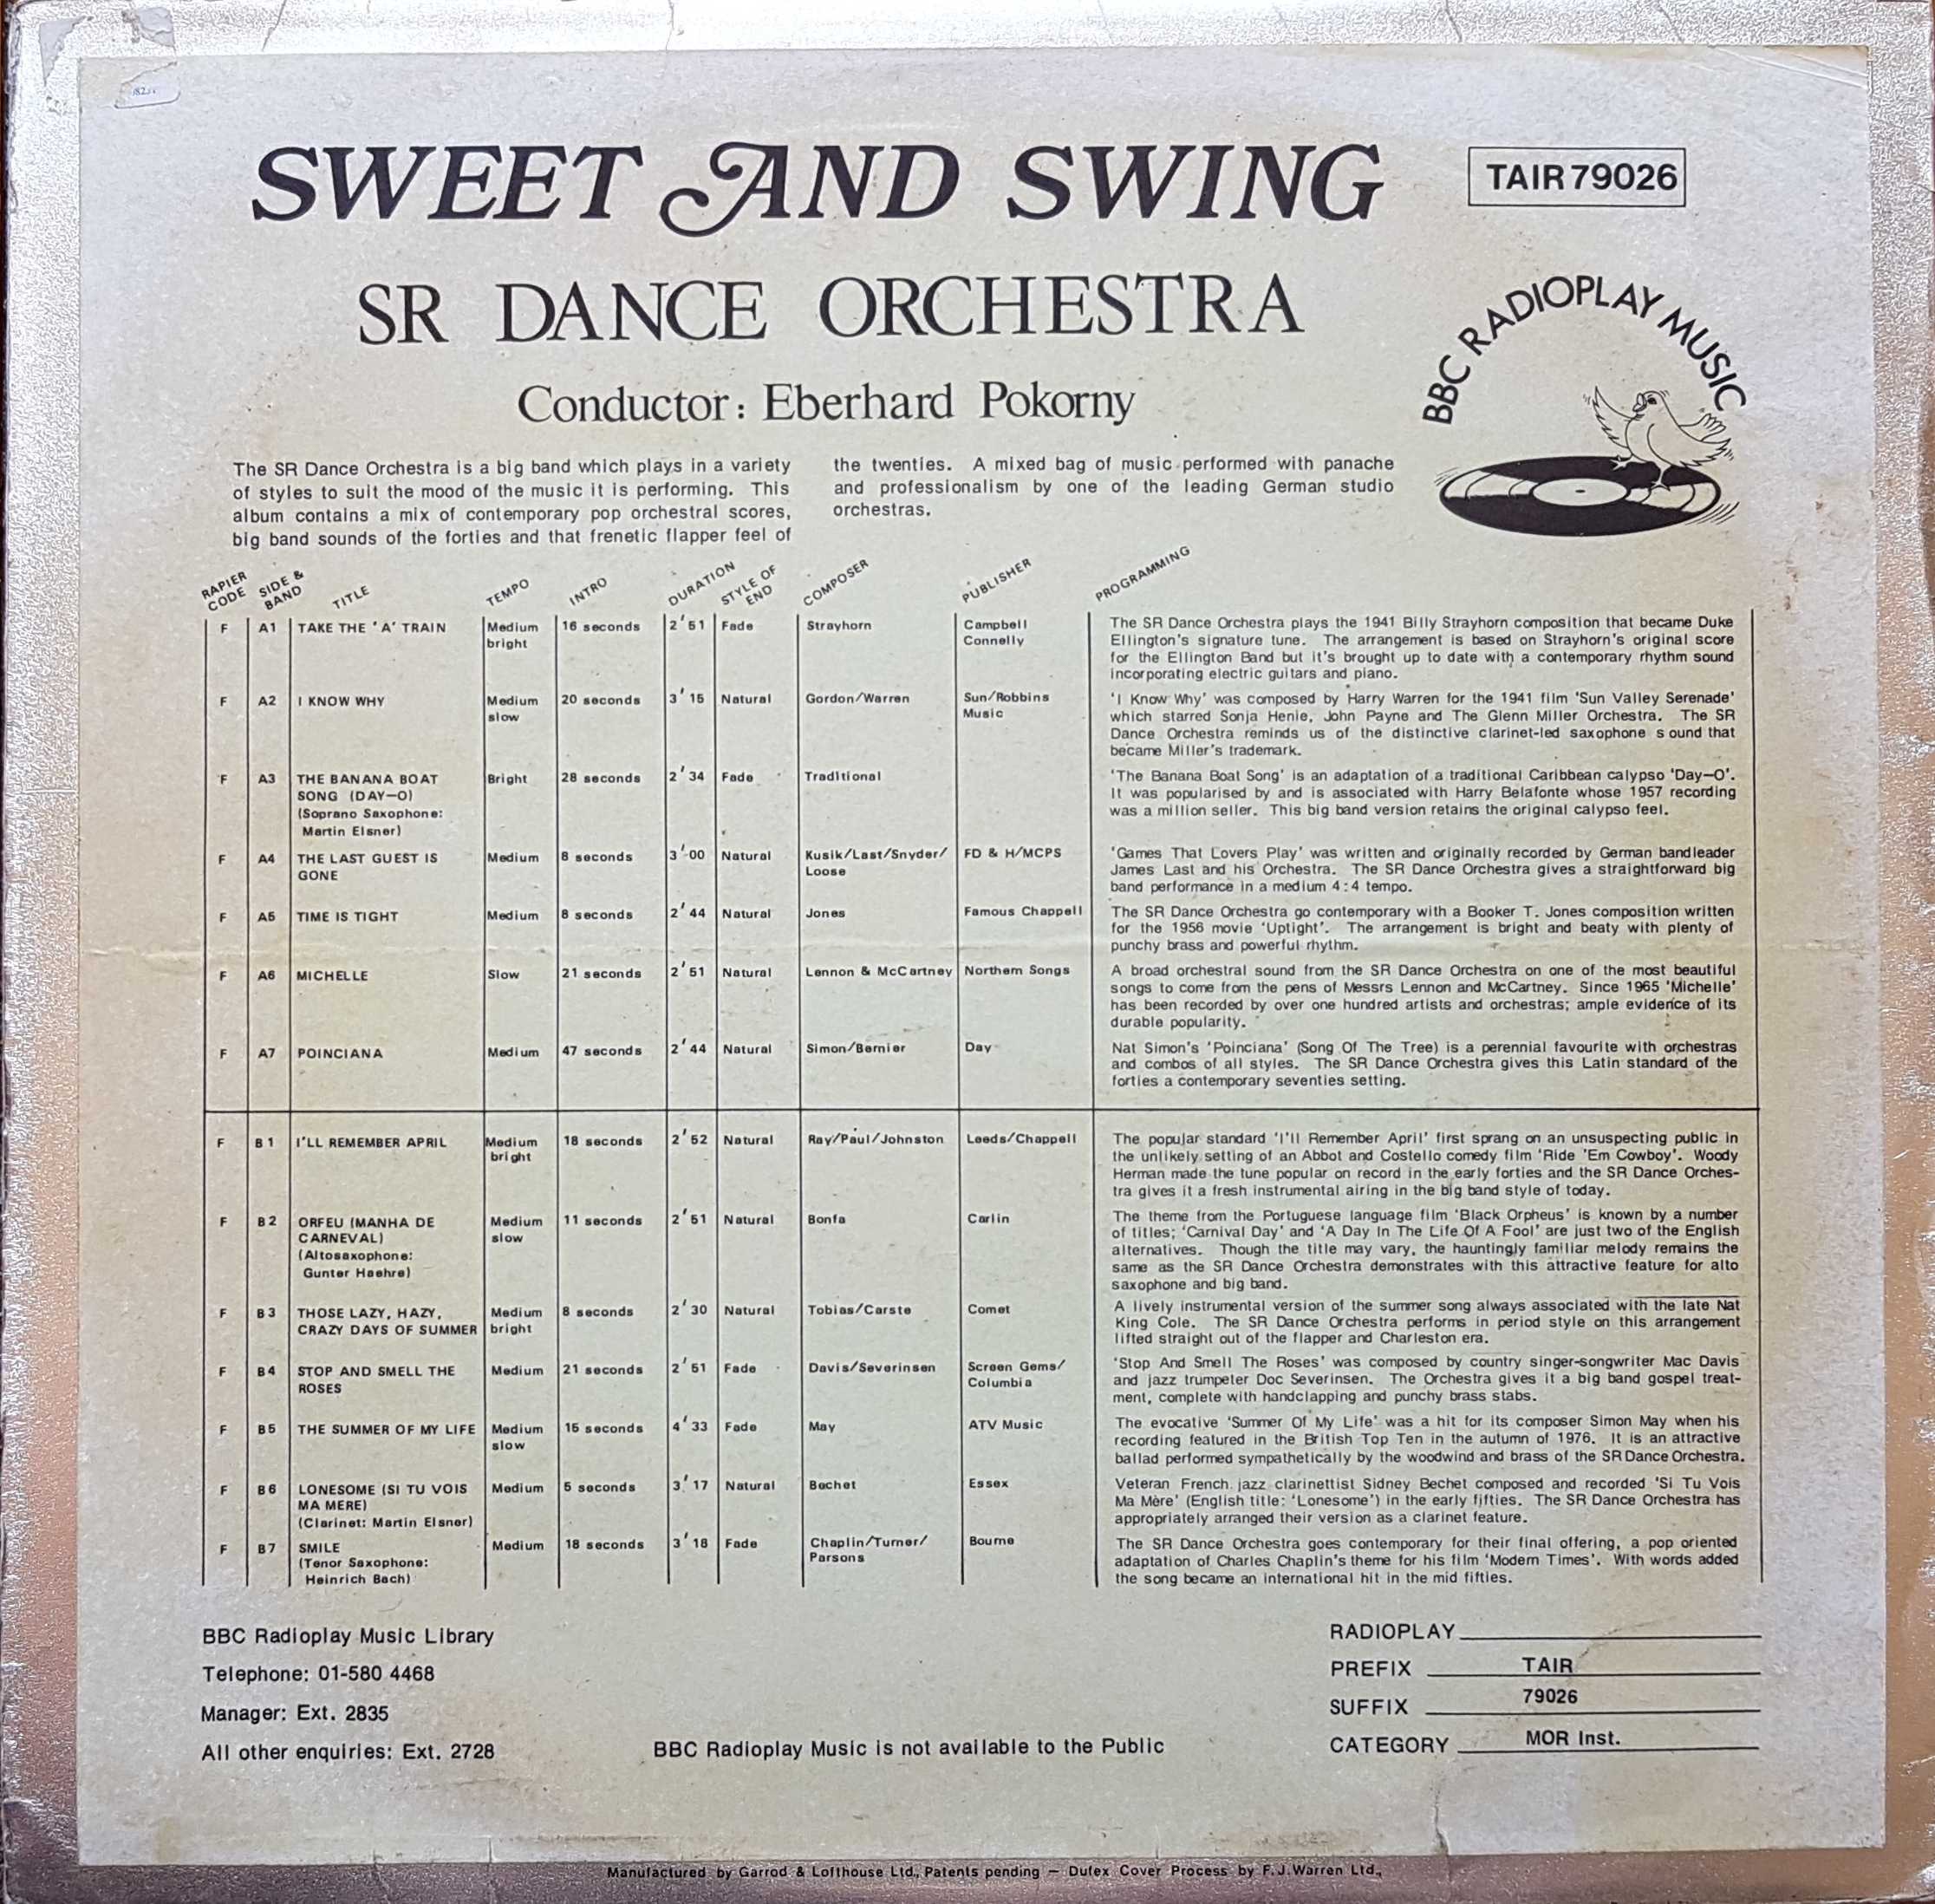 Picture of TAIR 79026 Sweet and sing by artist SR Dance Orchestra from the BBC records and Tapes library